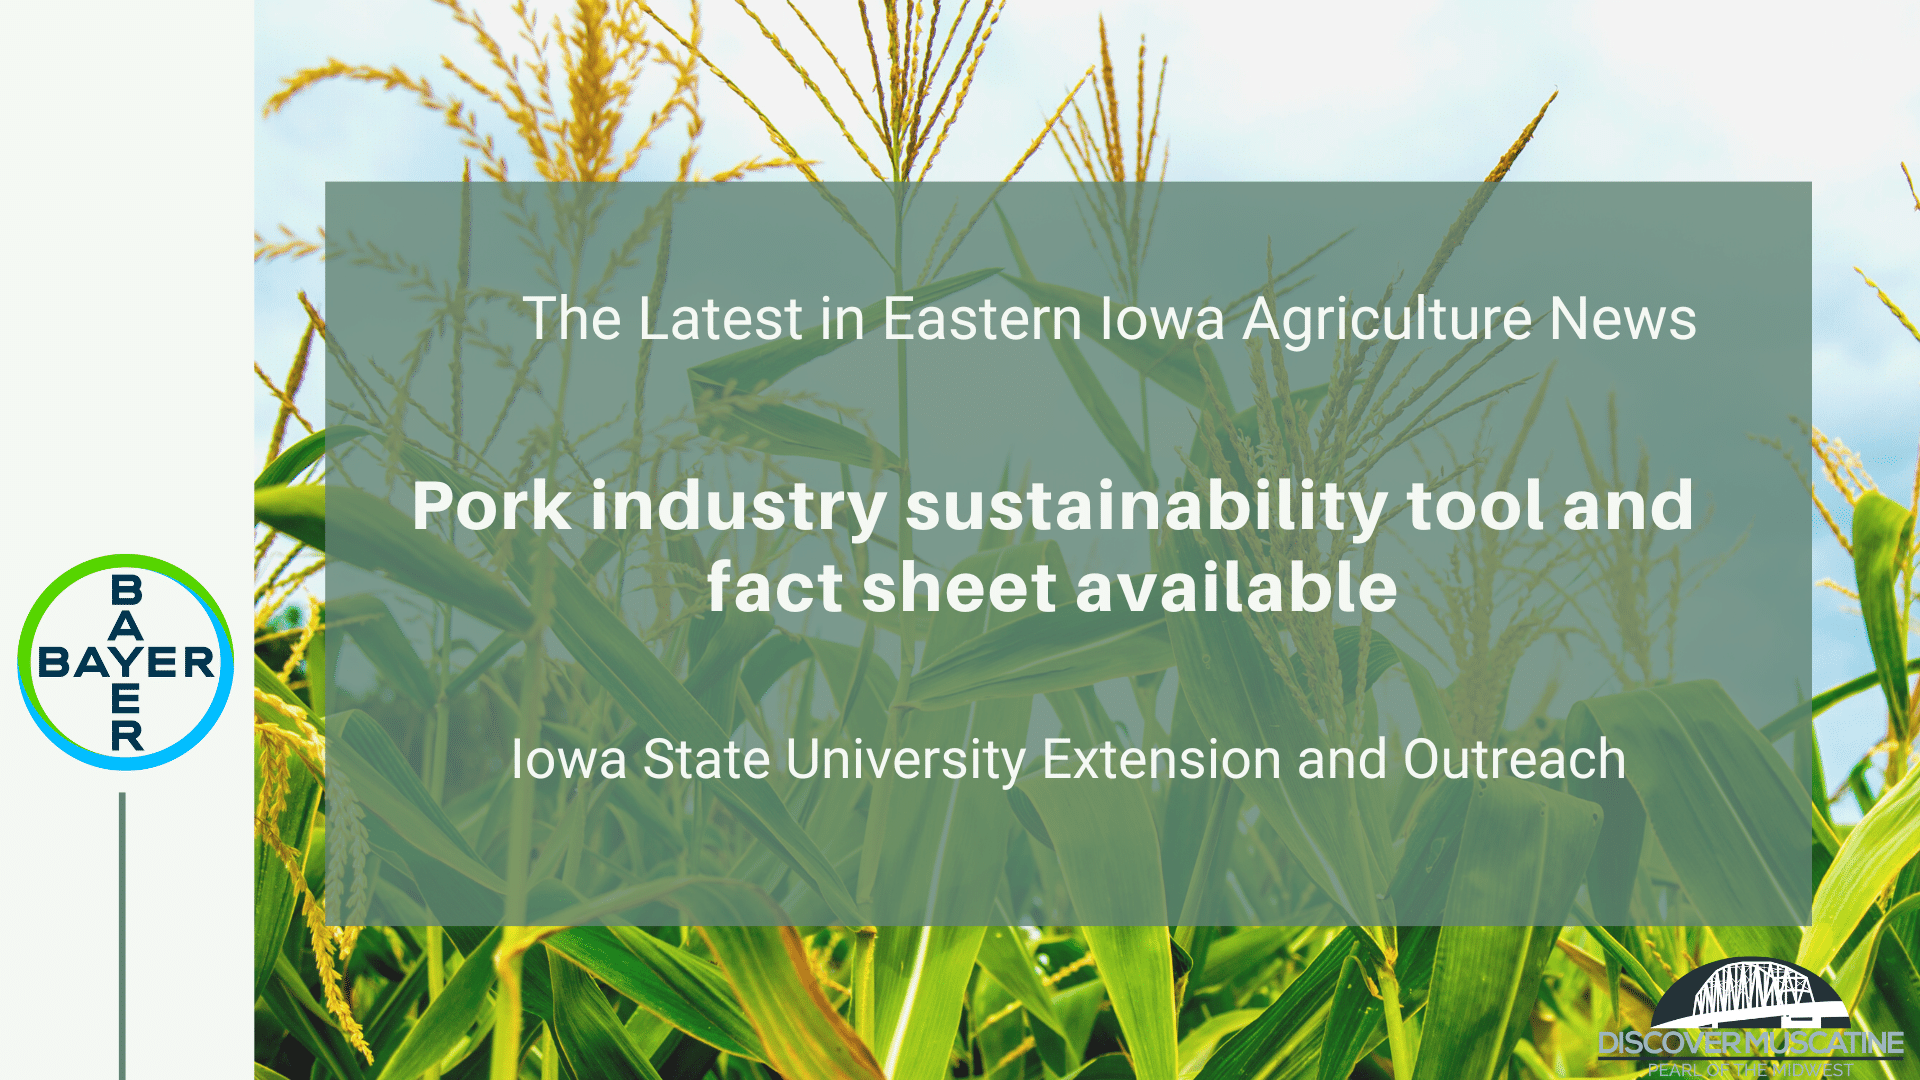 Pork industry sustainability tool and fact sheet available